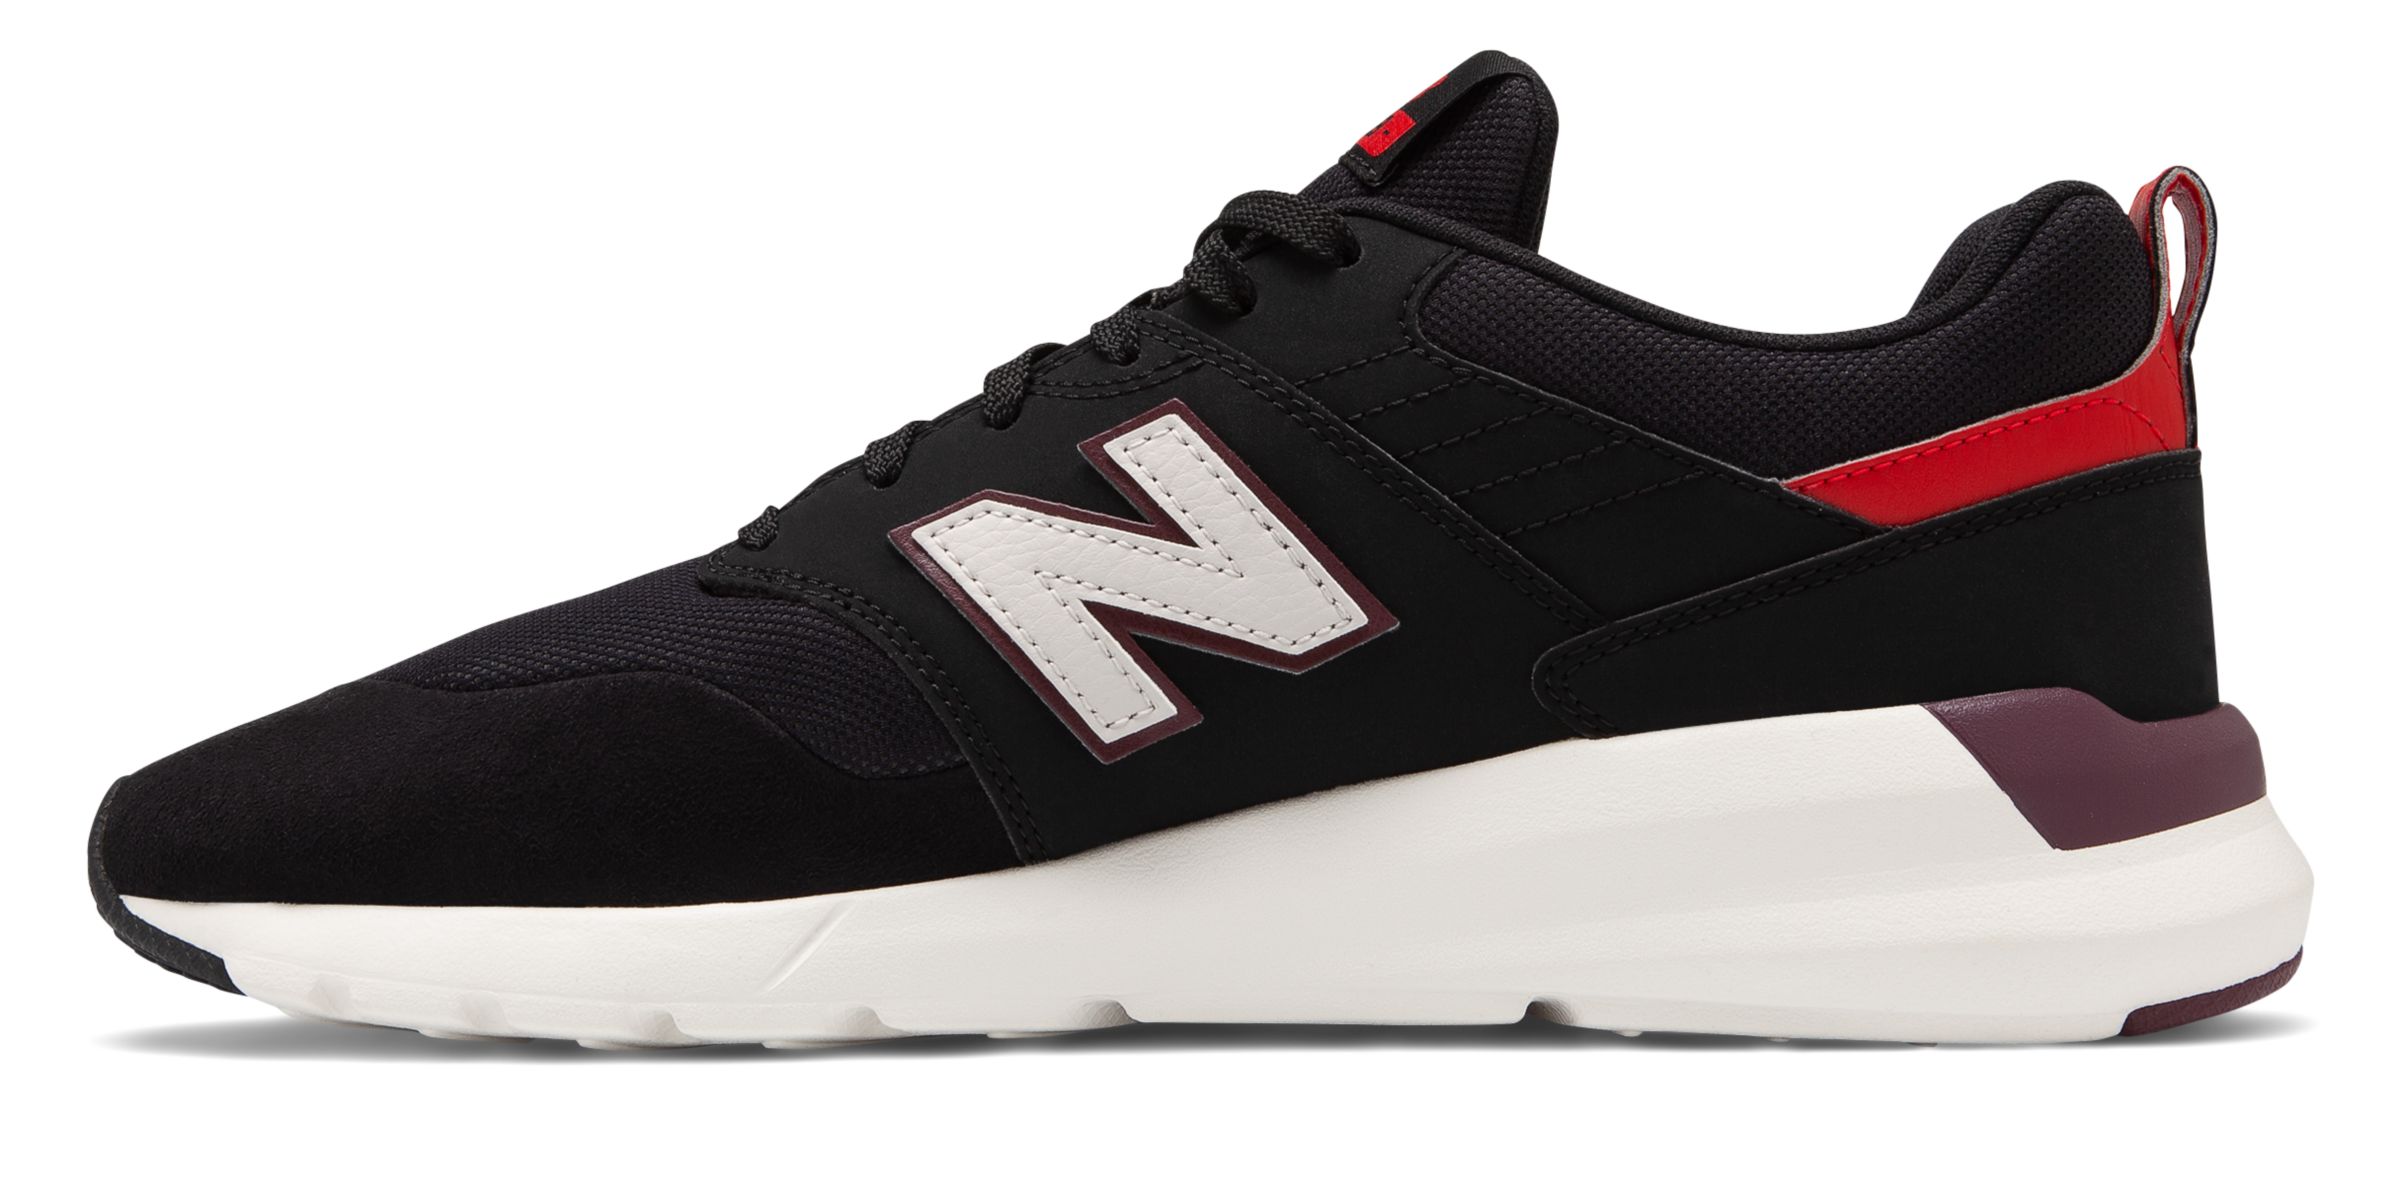 New Balance MS009V1-26032-M on Sale - Discounts Up to 66% Off on MS009LA1  at Joe's New Balance Outlet